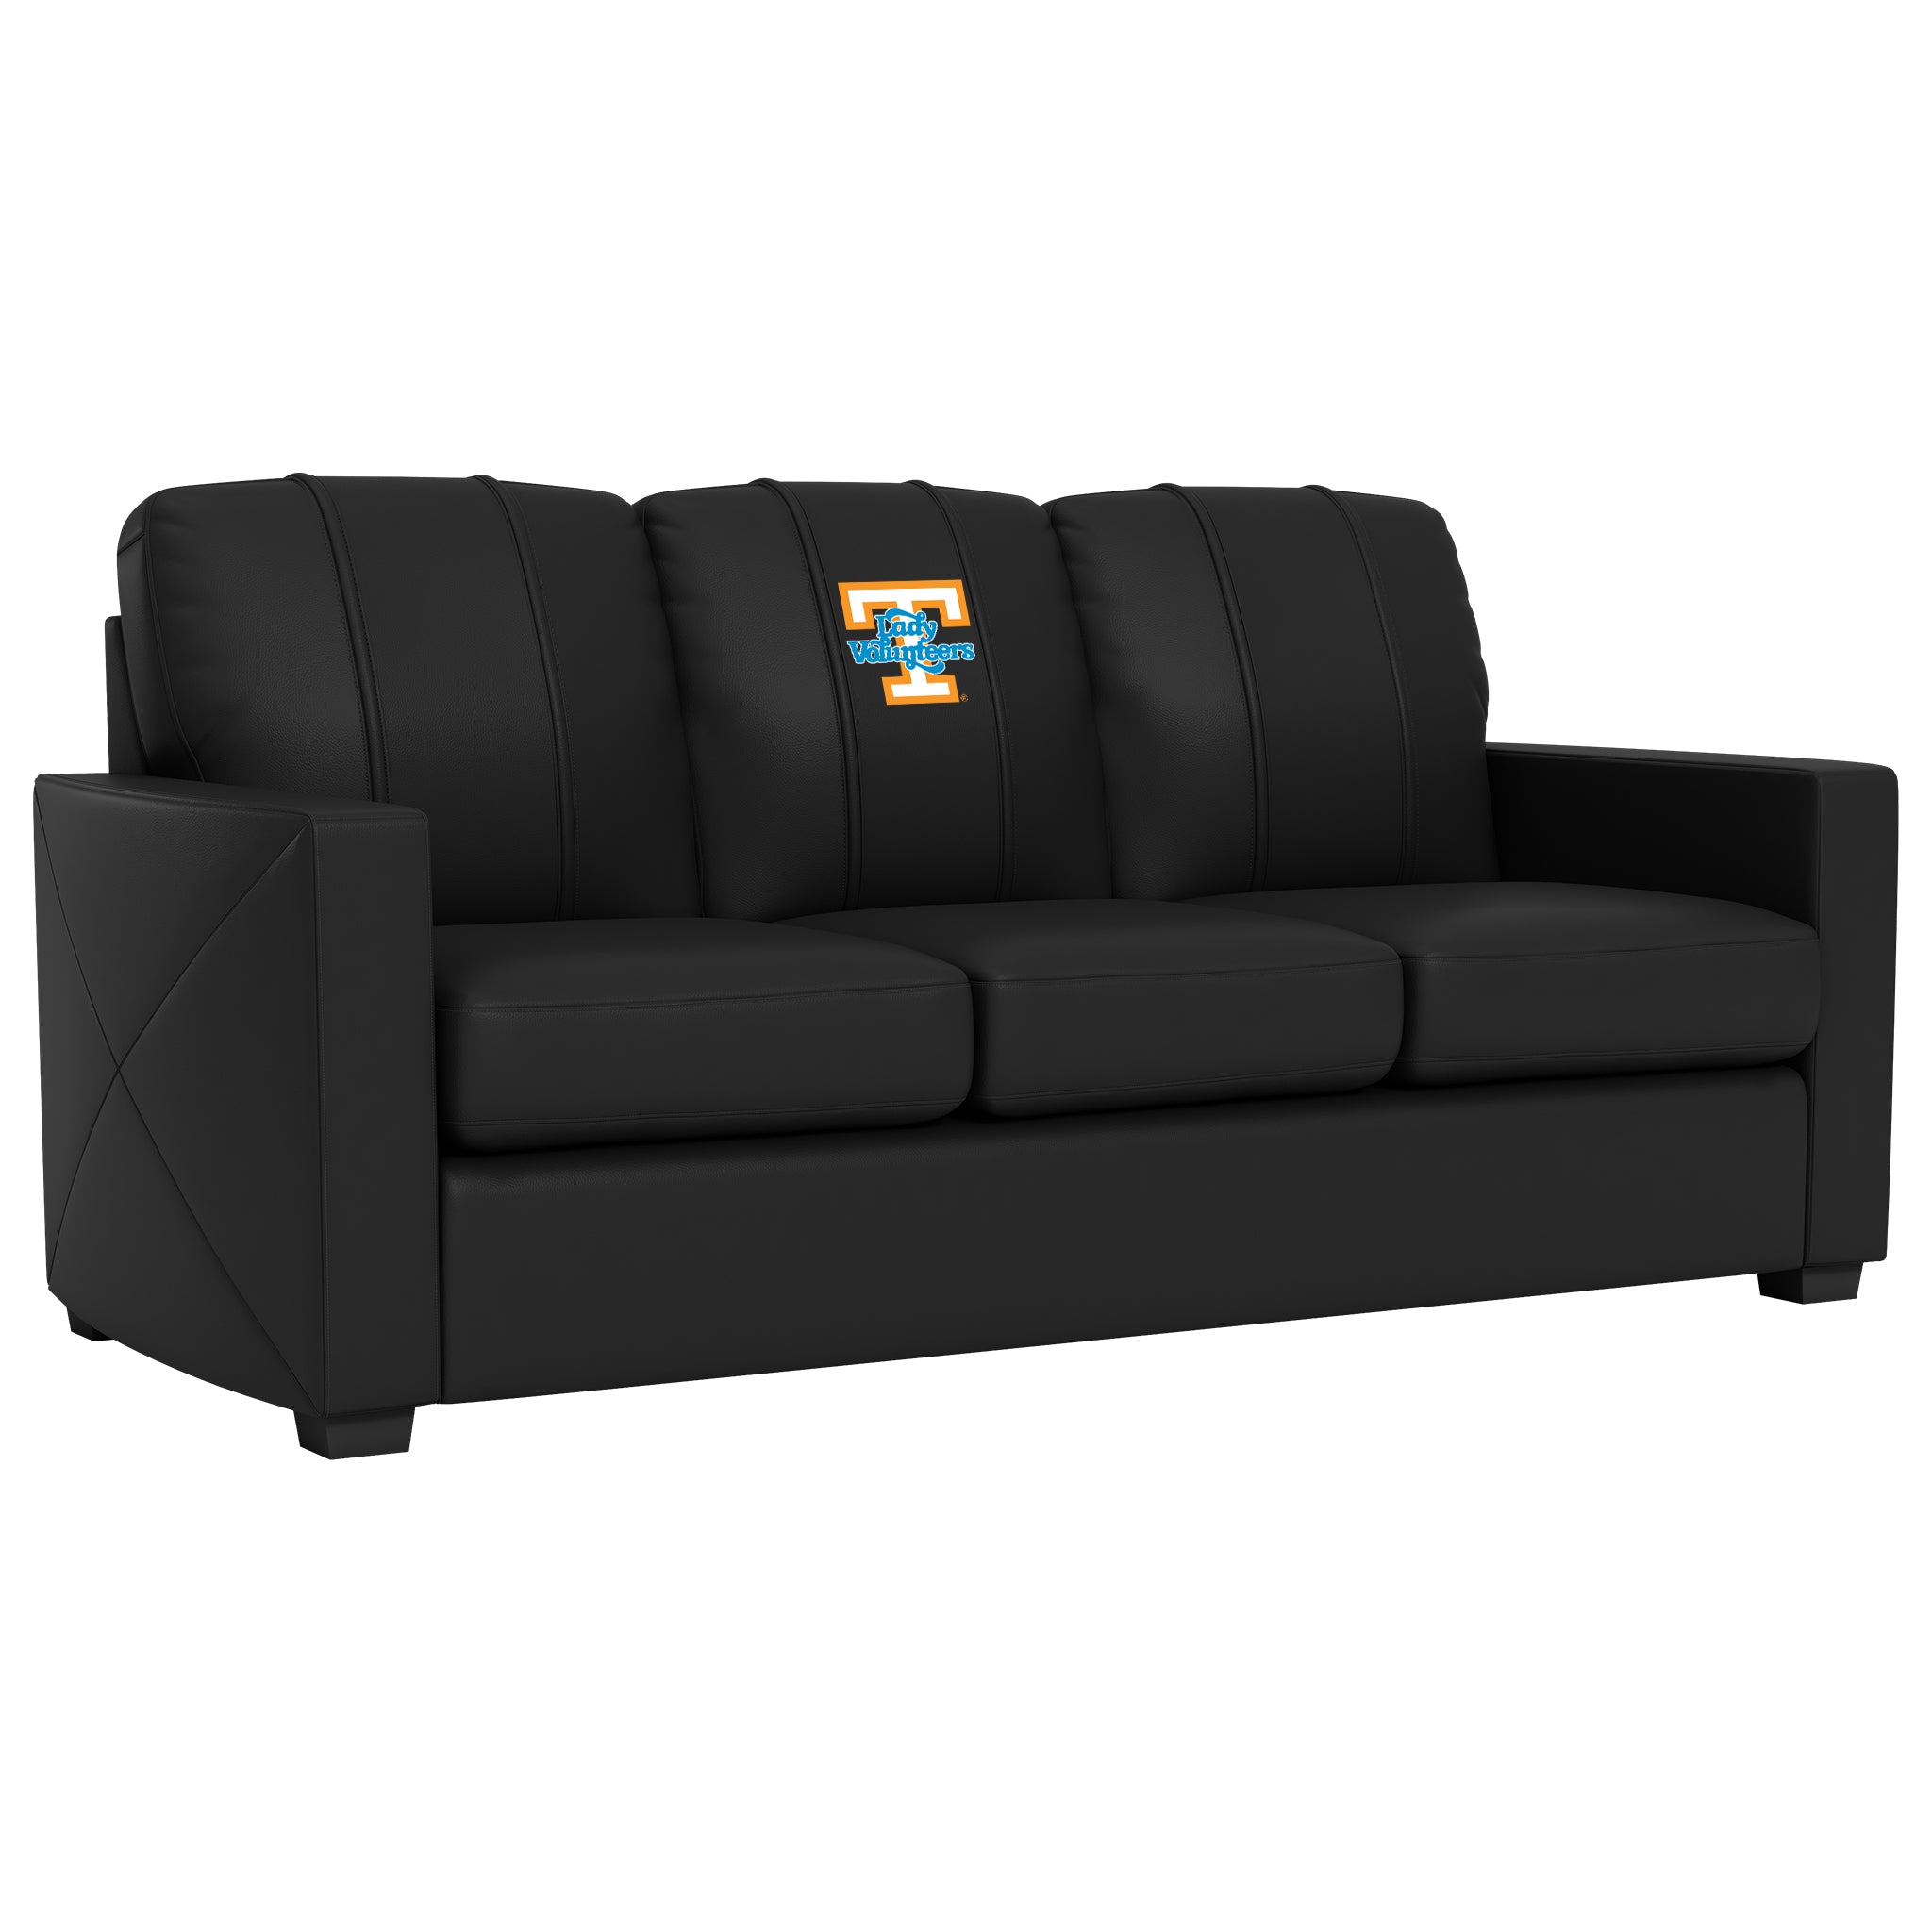 Tennessee Volunteers Silver Sofa with Tennessee Lady Volunteers Logo